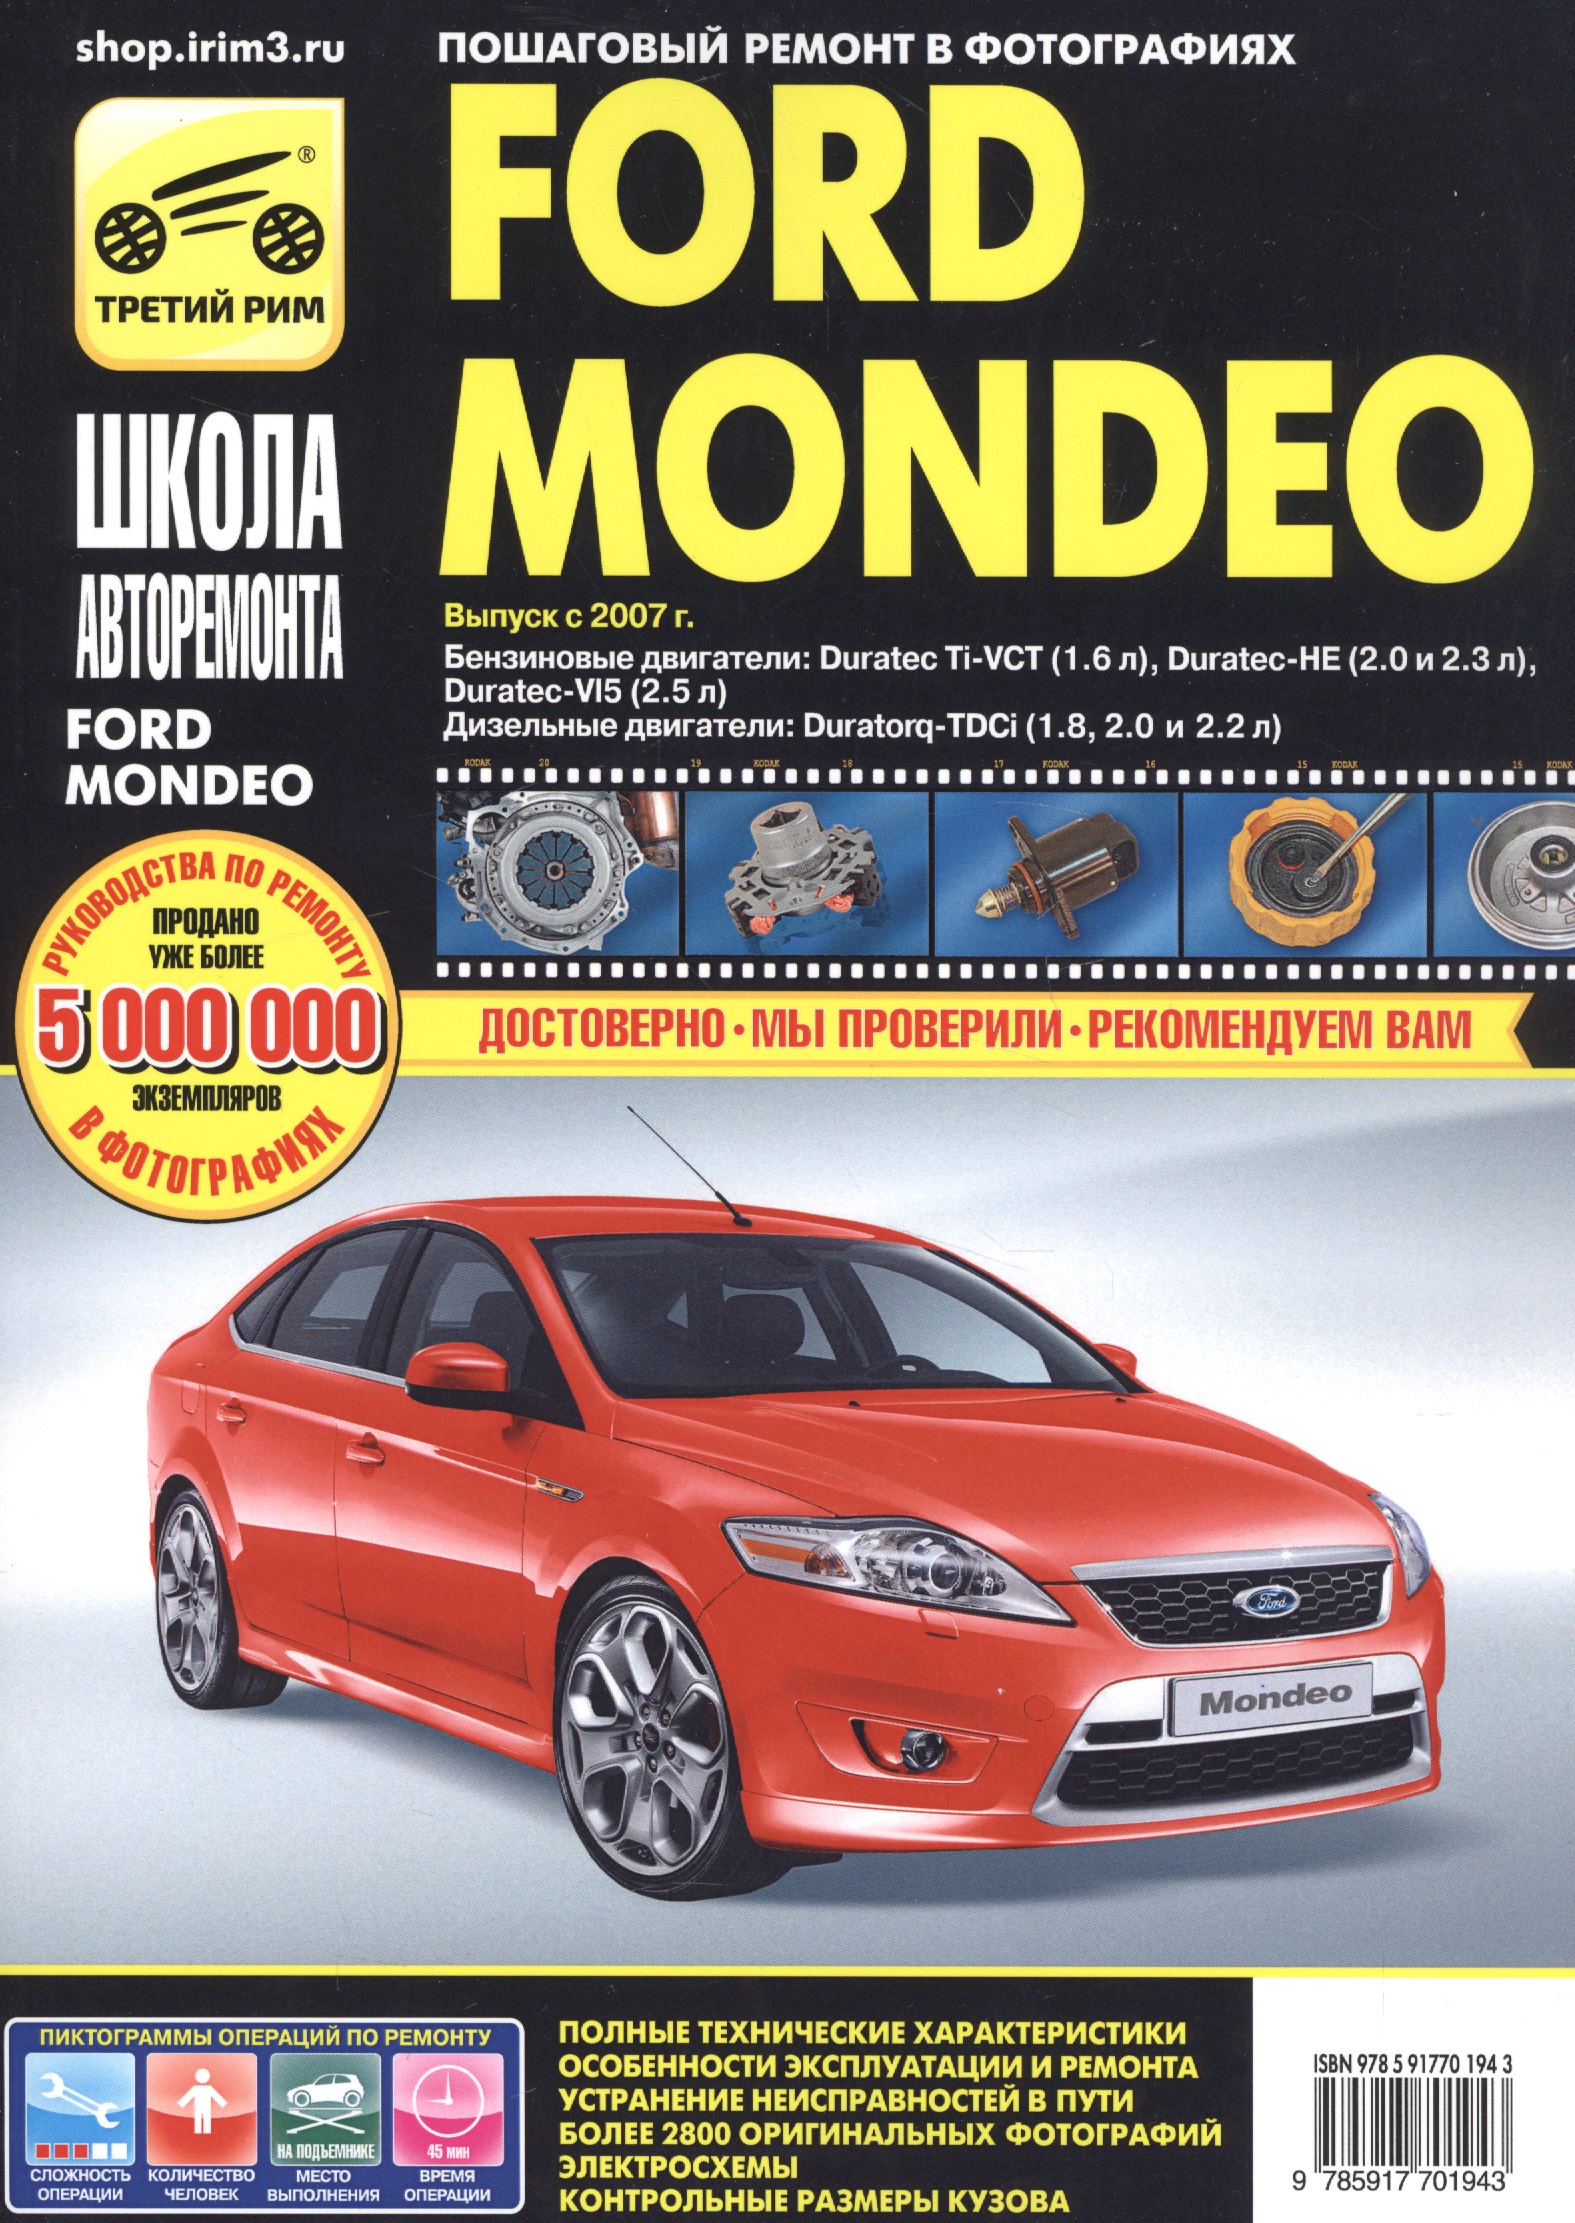 Ford Mondeo ././.  2007 . . . 1.6 2.0 2.3 2.5 . . 1.8 2.0 2.2 /  .  .// 2007 .//